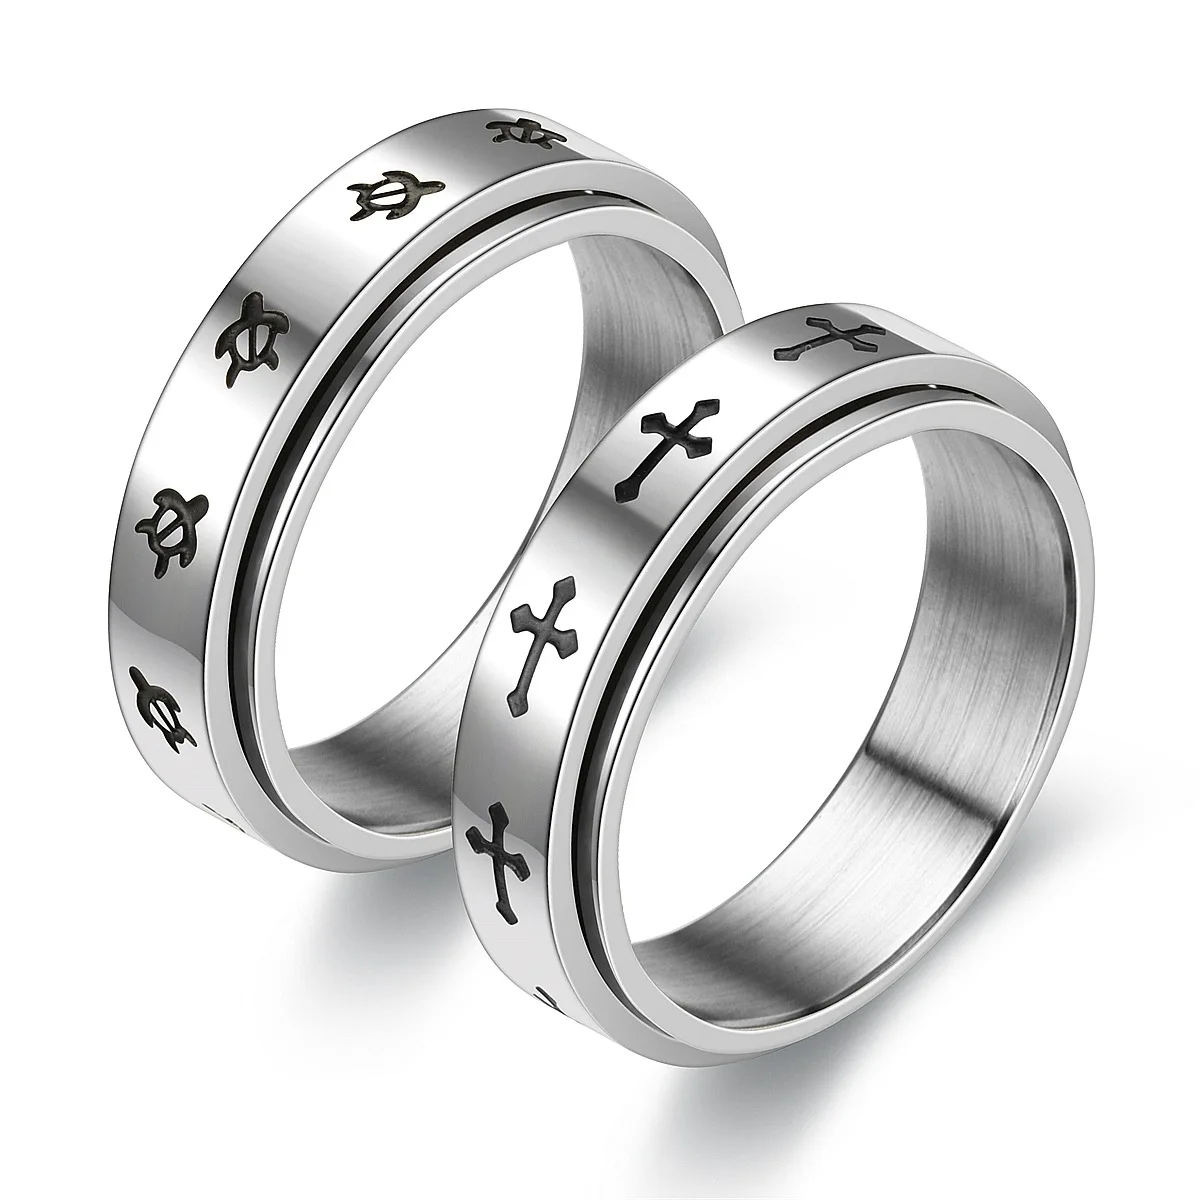 

Dropshipping Classic Men Swivel Ring Decompression Accessories Cross Stainless Steel Wedding Casual Sports Jewelry